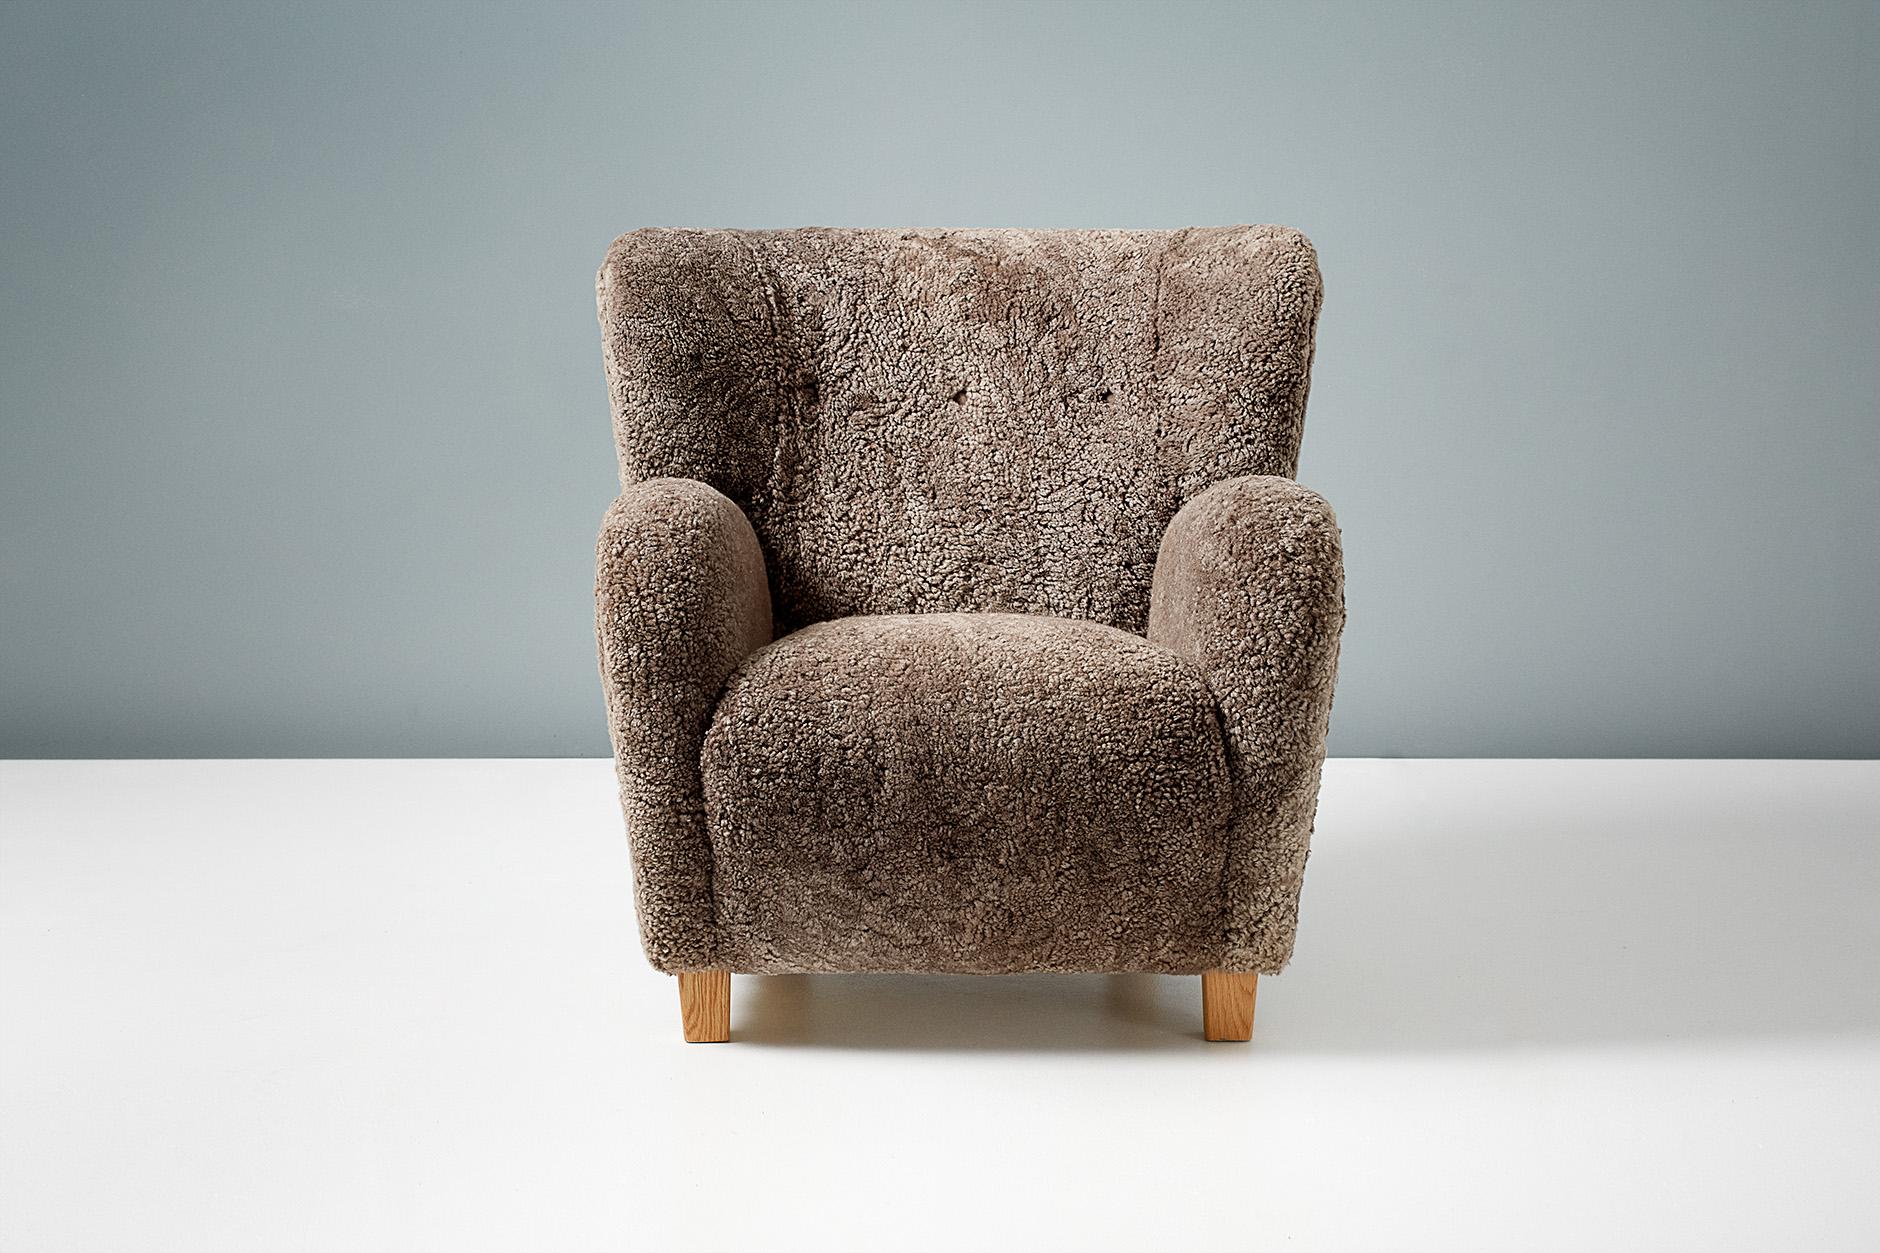 Dagmar Design

KARU Lounge Chair & Ottoman

A pair of custom made lounge chairs & matching ottoman developed and produced at our workshops in London using the highest quality materials. These examples are upholstered in ‘Sahara’ shearling and